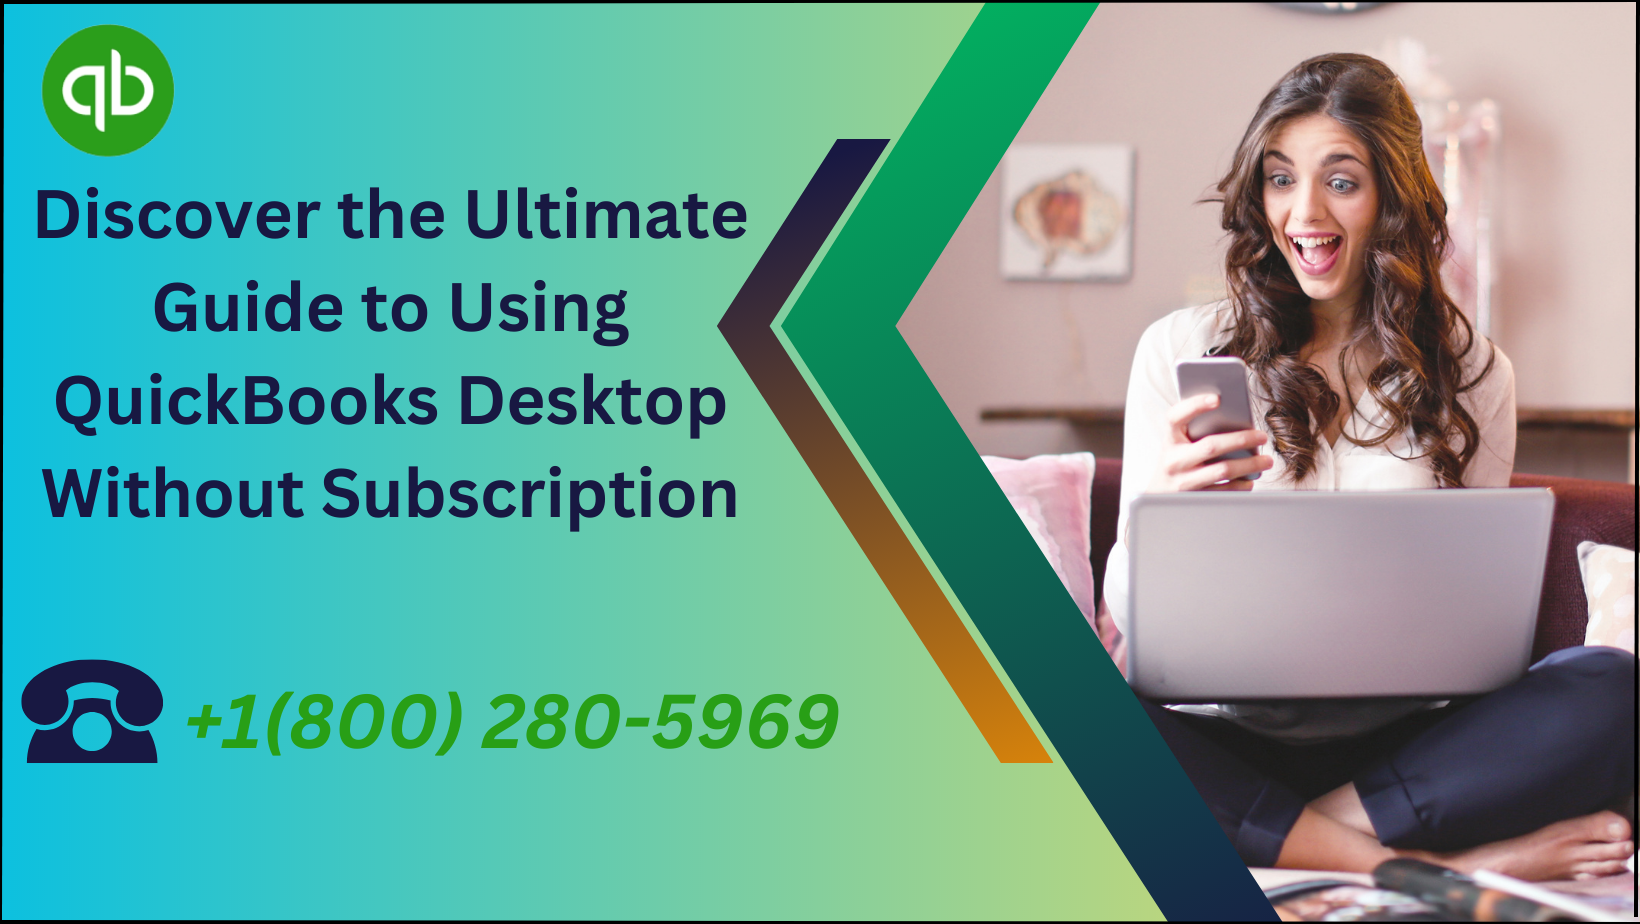 Discover the ultimate guide to using QuickBooks Desktop without subscription.